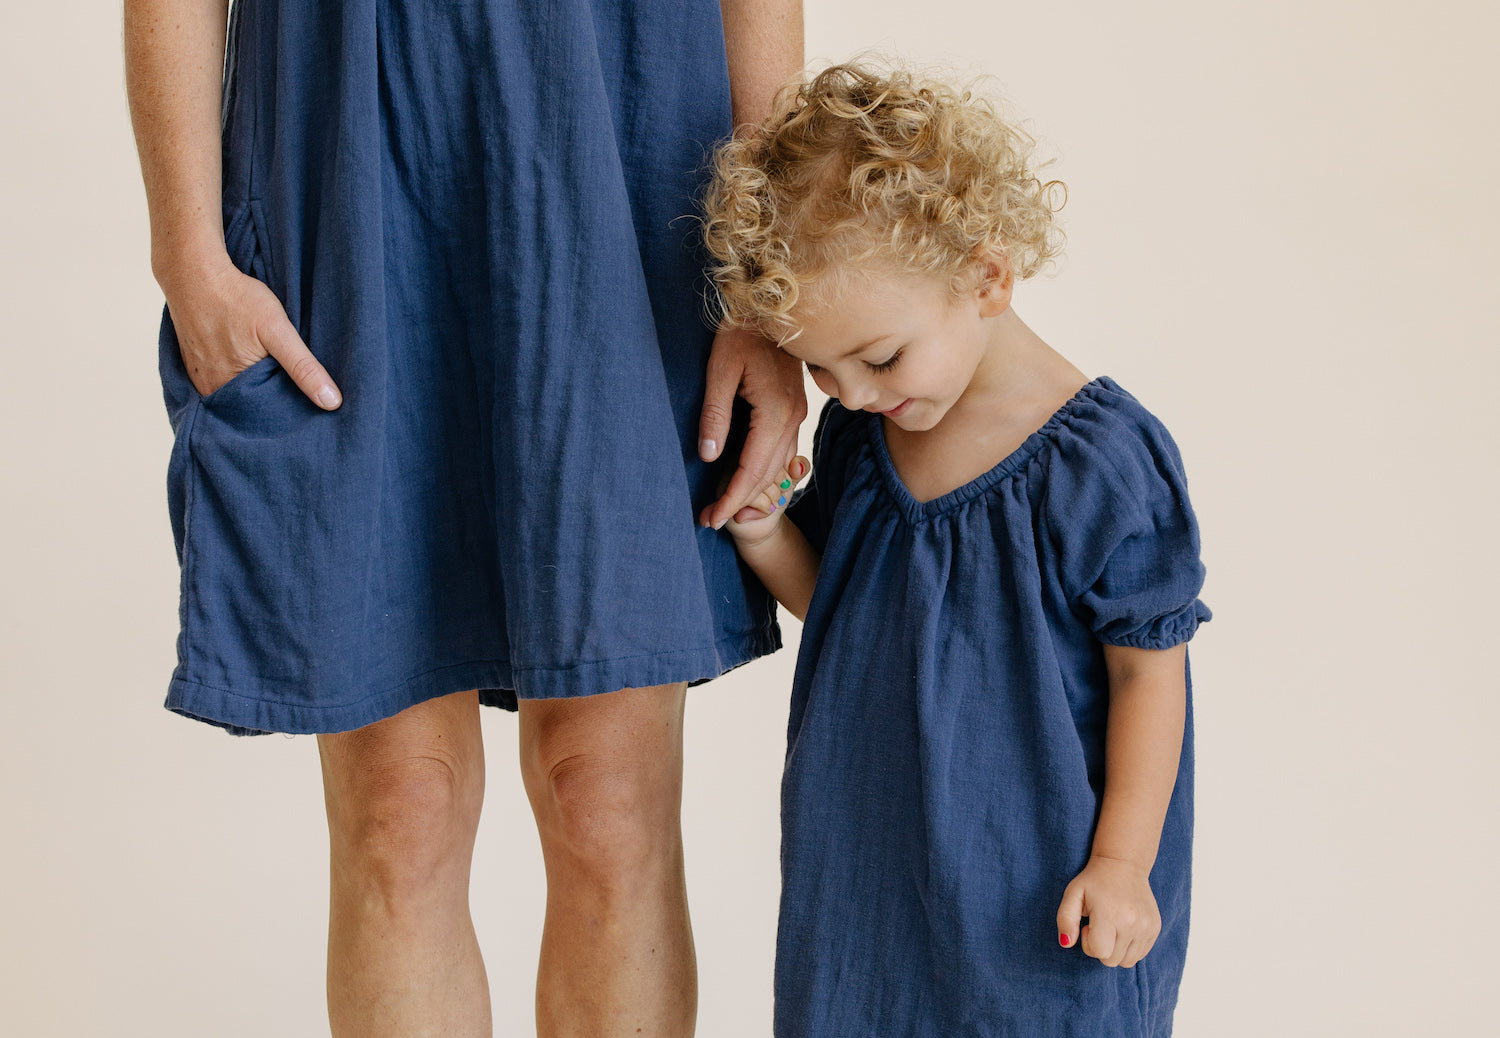 matching cotton house dresses for mommy and me in indigo cotton gauze